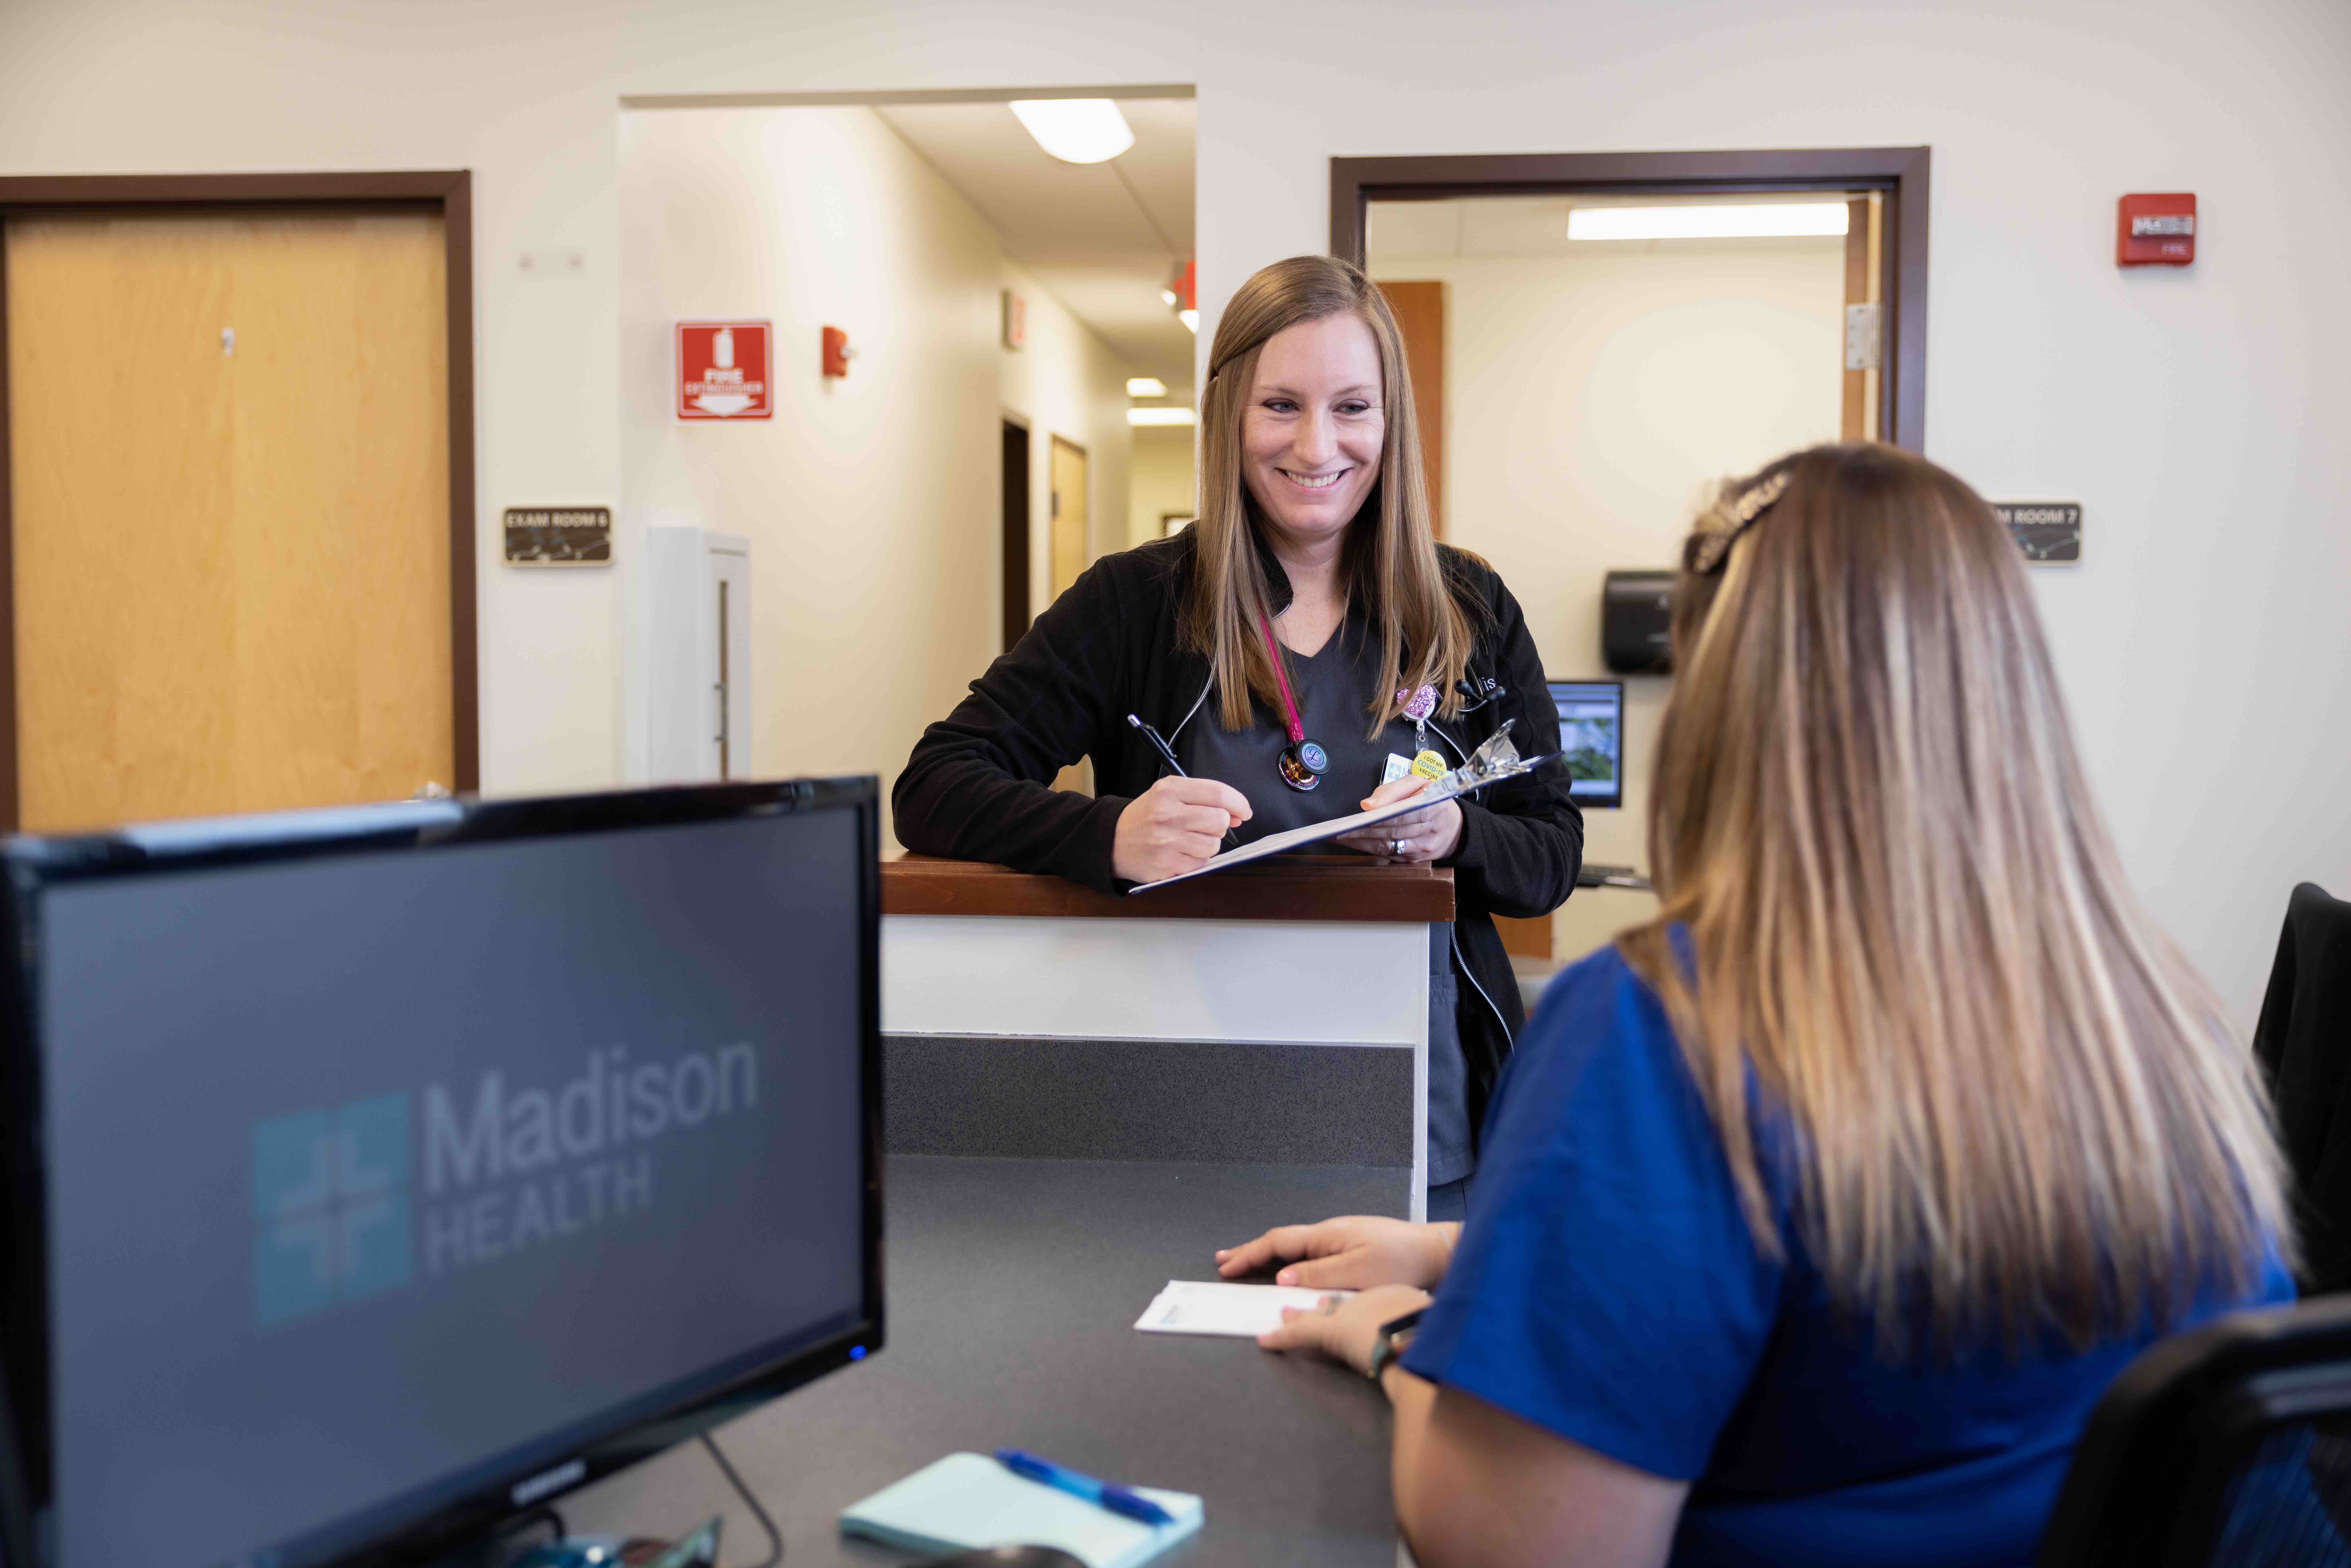 Madison Health Primary Care provider smiling at patient while looking at other provider who has a notepad